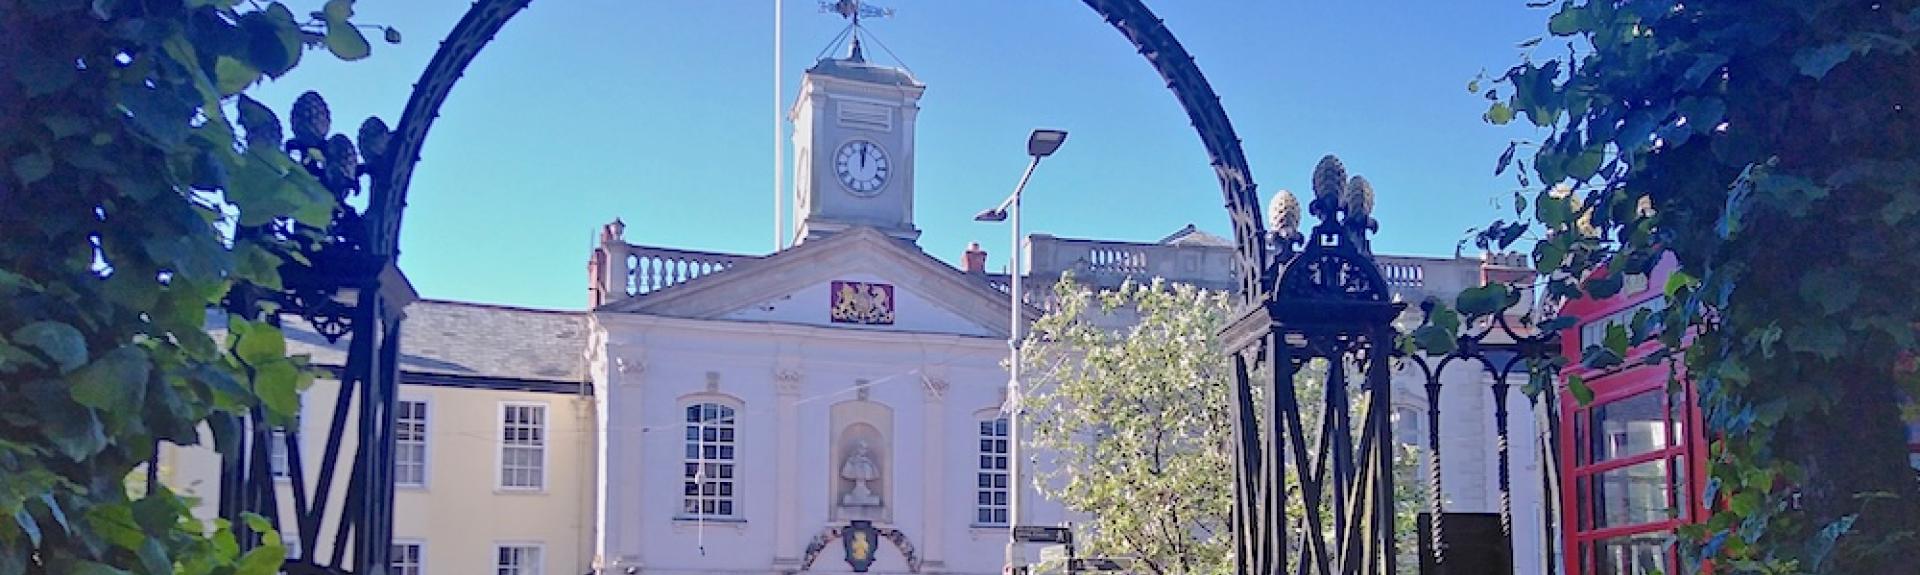 A town hall with a clock tower seen  through an ornate ironwork arch